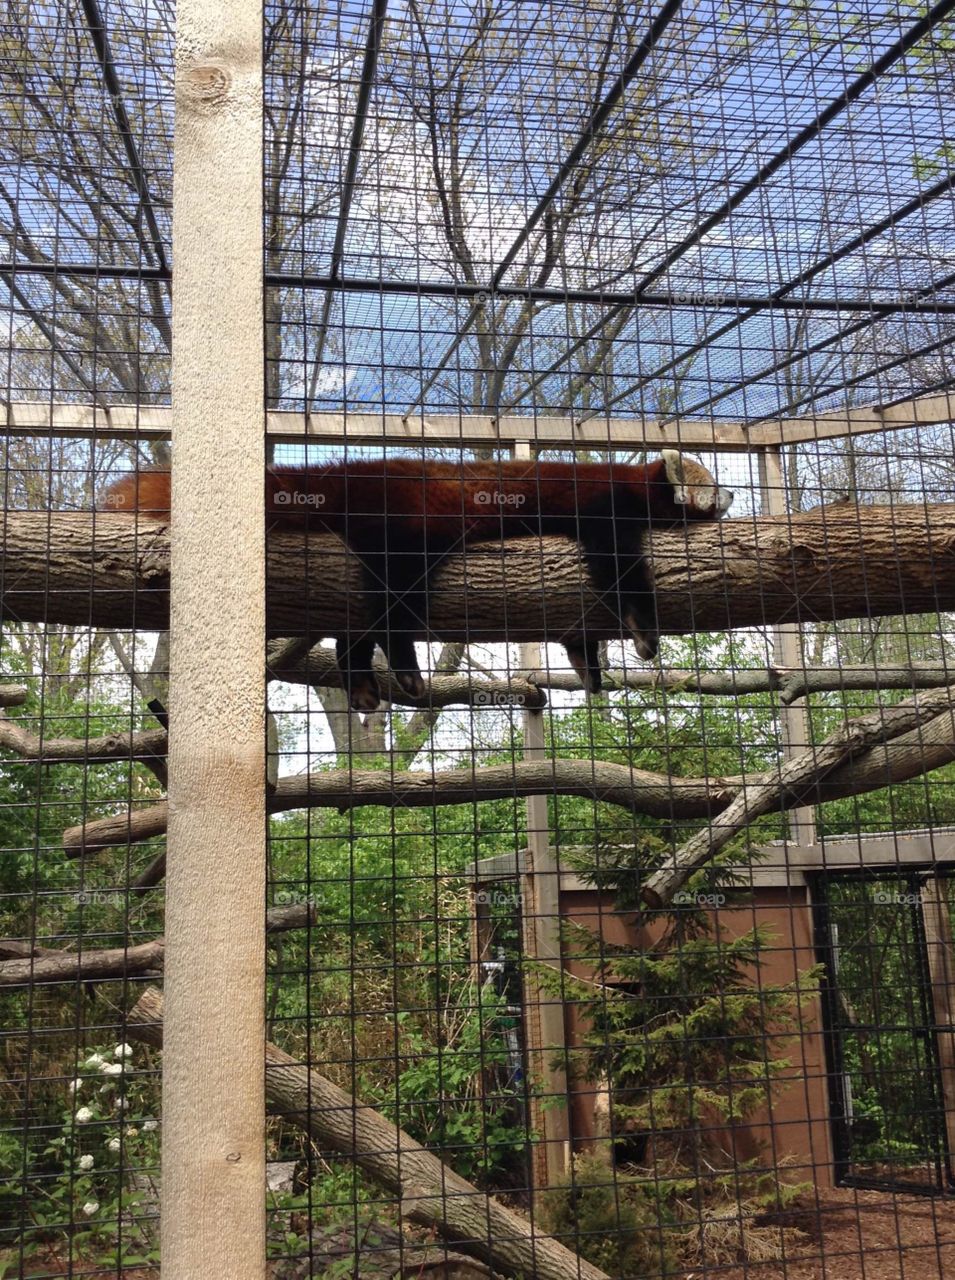 This red panda is sprawled out on a log in the cage.